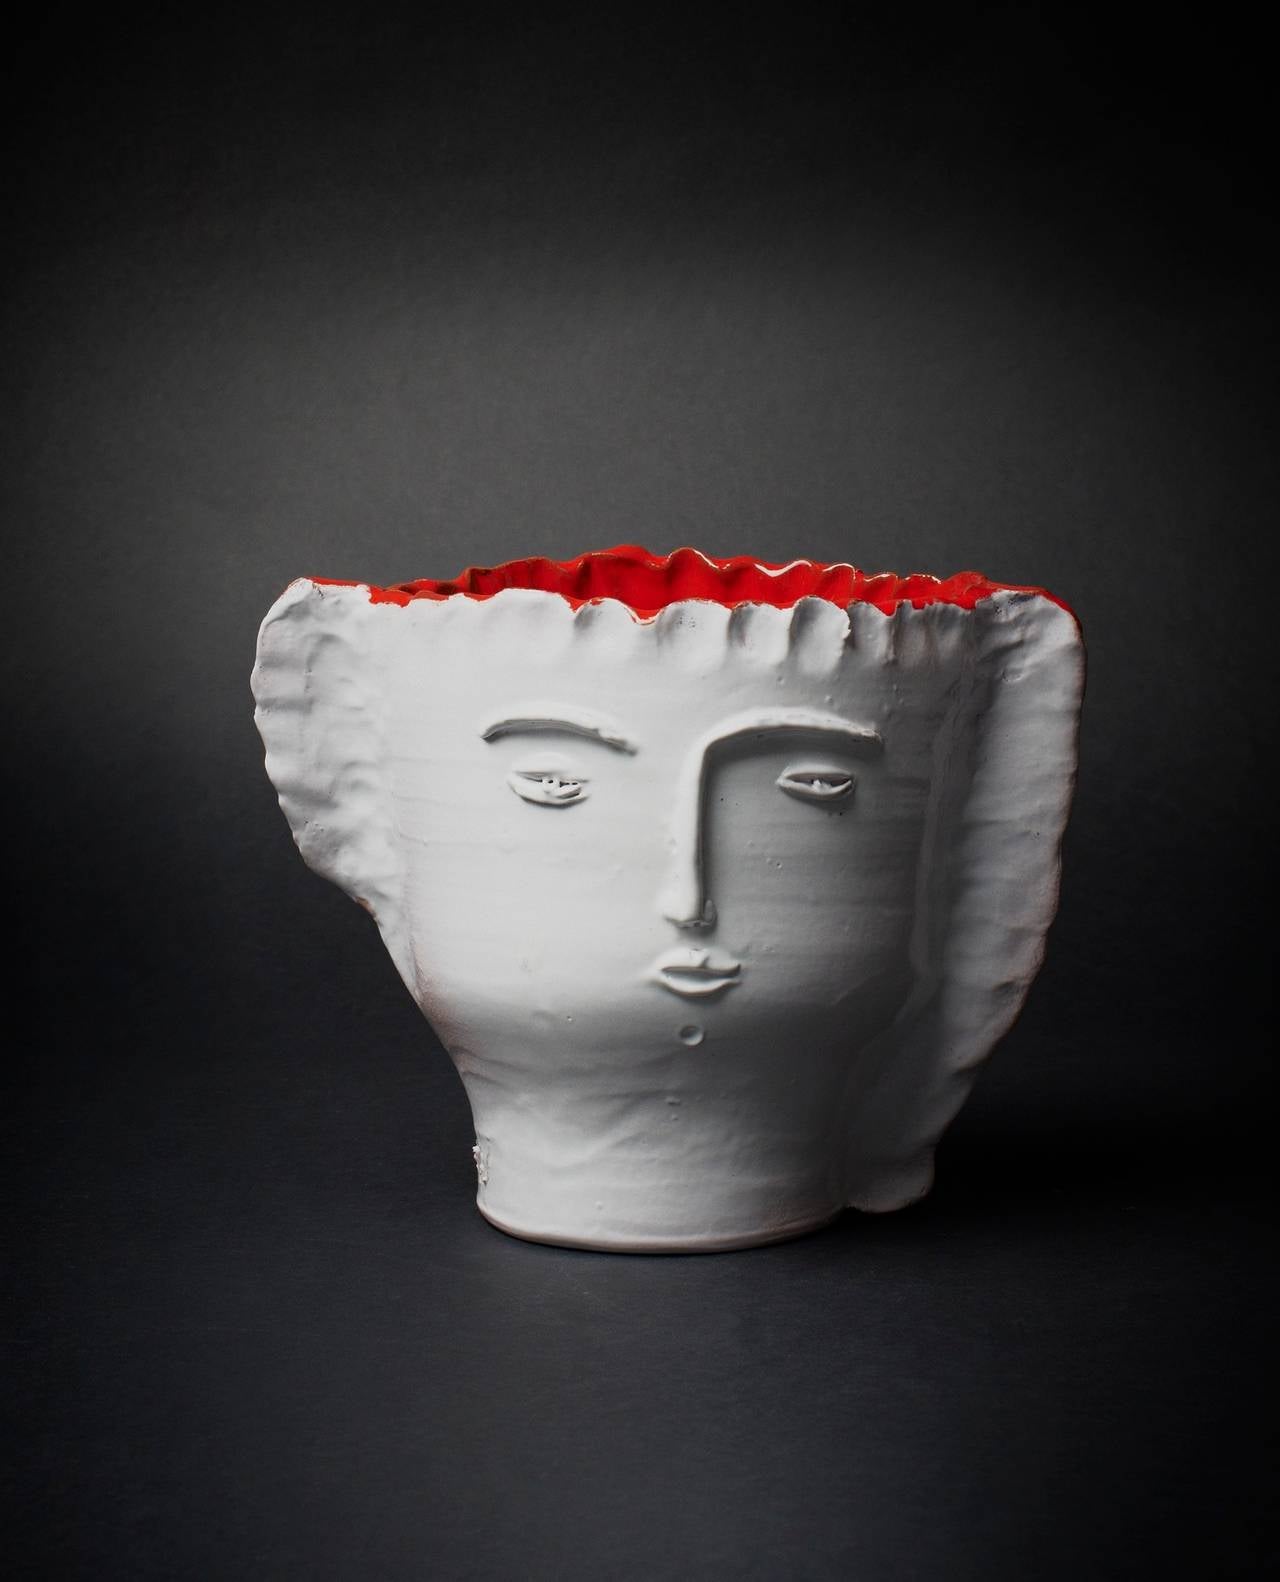 Robert and Jean Cloutier (Cloutier Brothers). Ceramic vase 'Visage au chignon'. White ceramic with red enamel inside. Signed Cloutier RJ.